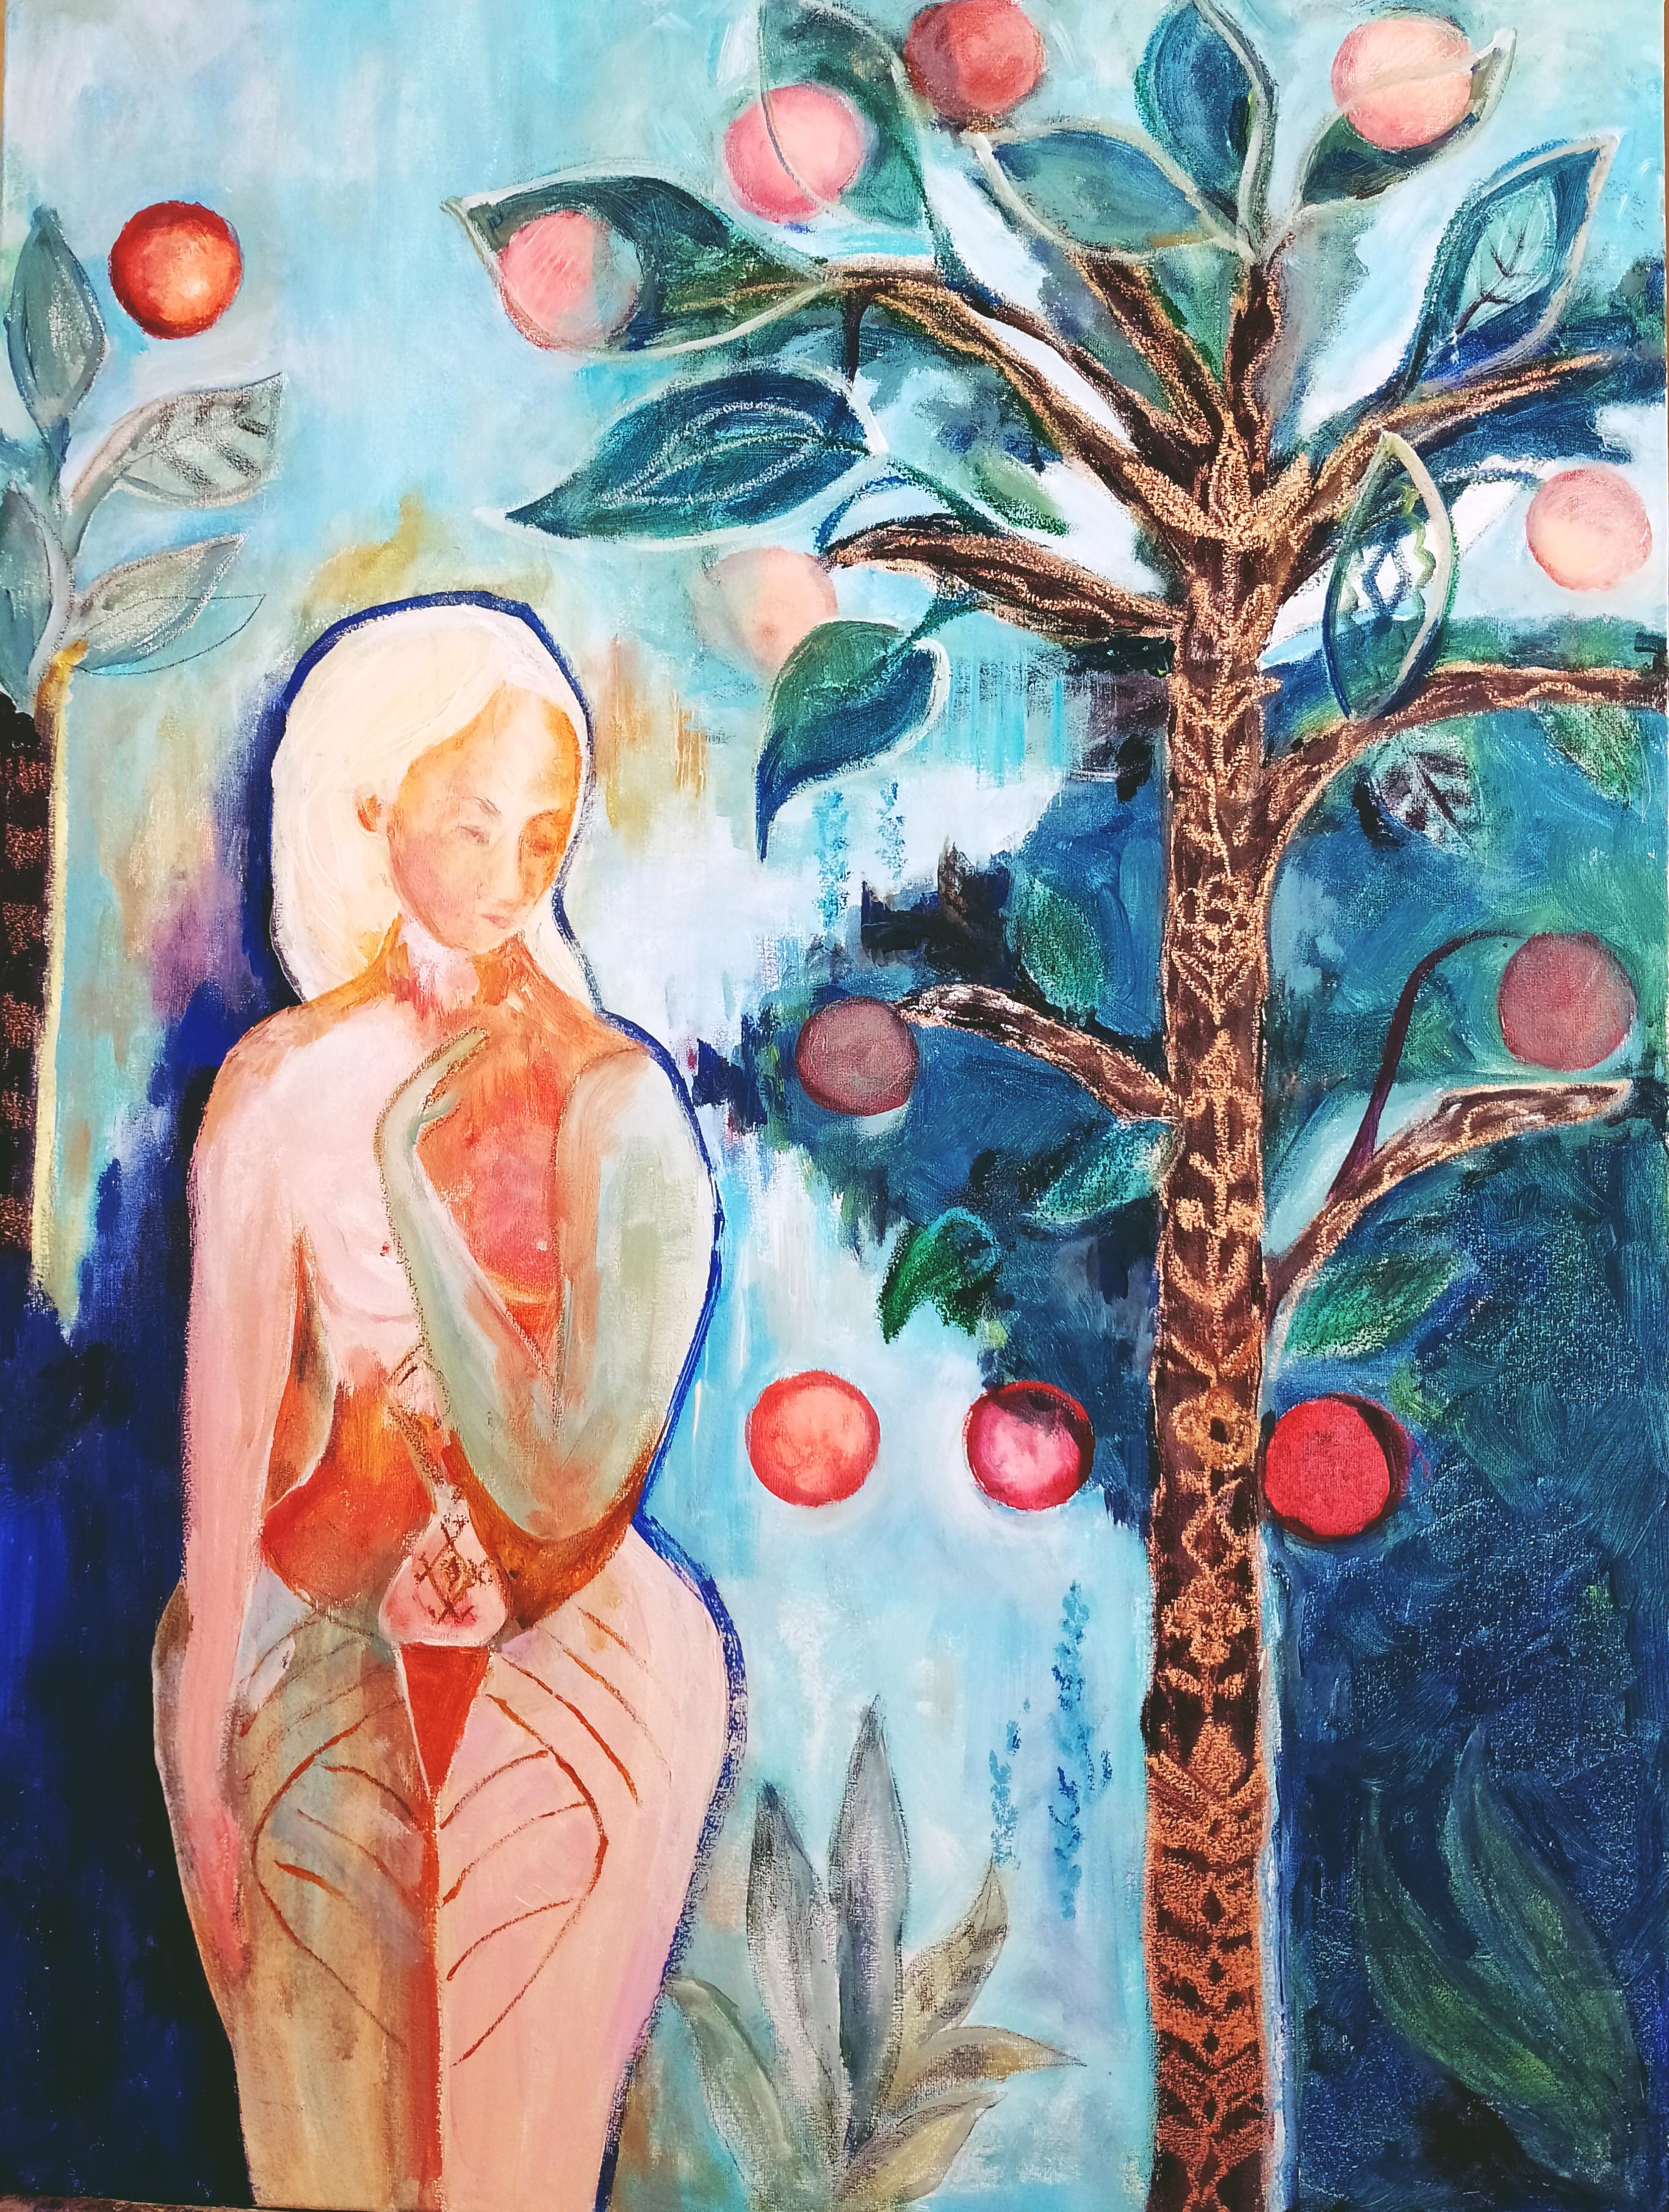 This painting is an attempt to blend ancient symbols, contemporary understanding of feminine essence, and profound philosophical contemplations inspired by existentialism and phenomenology. The woman, represented in the image of Eve, stands as an